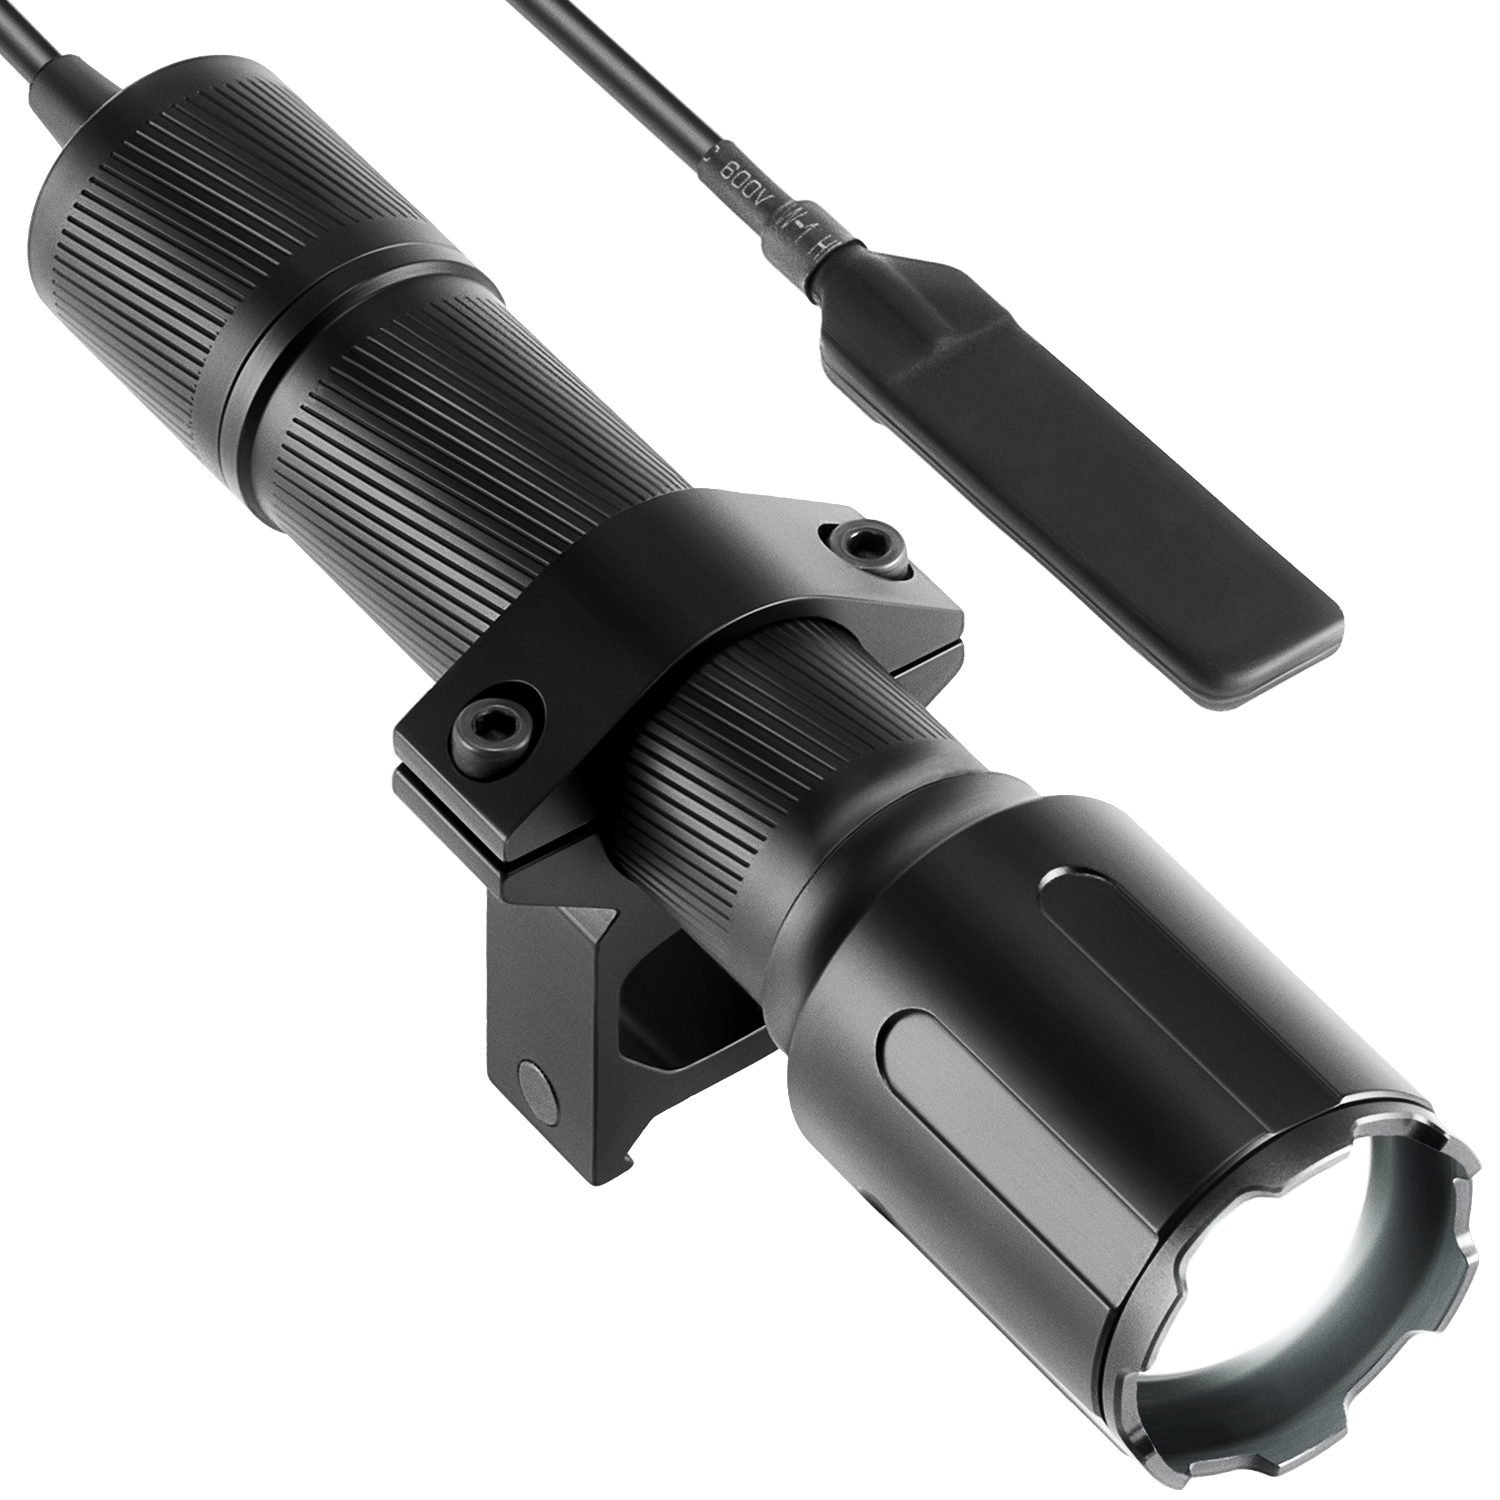 3000 Lumen Tactical Flashlight with Pressure Switch & Mounting Rings